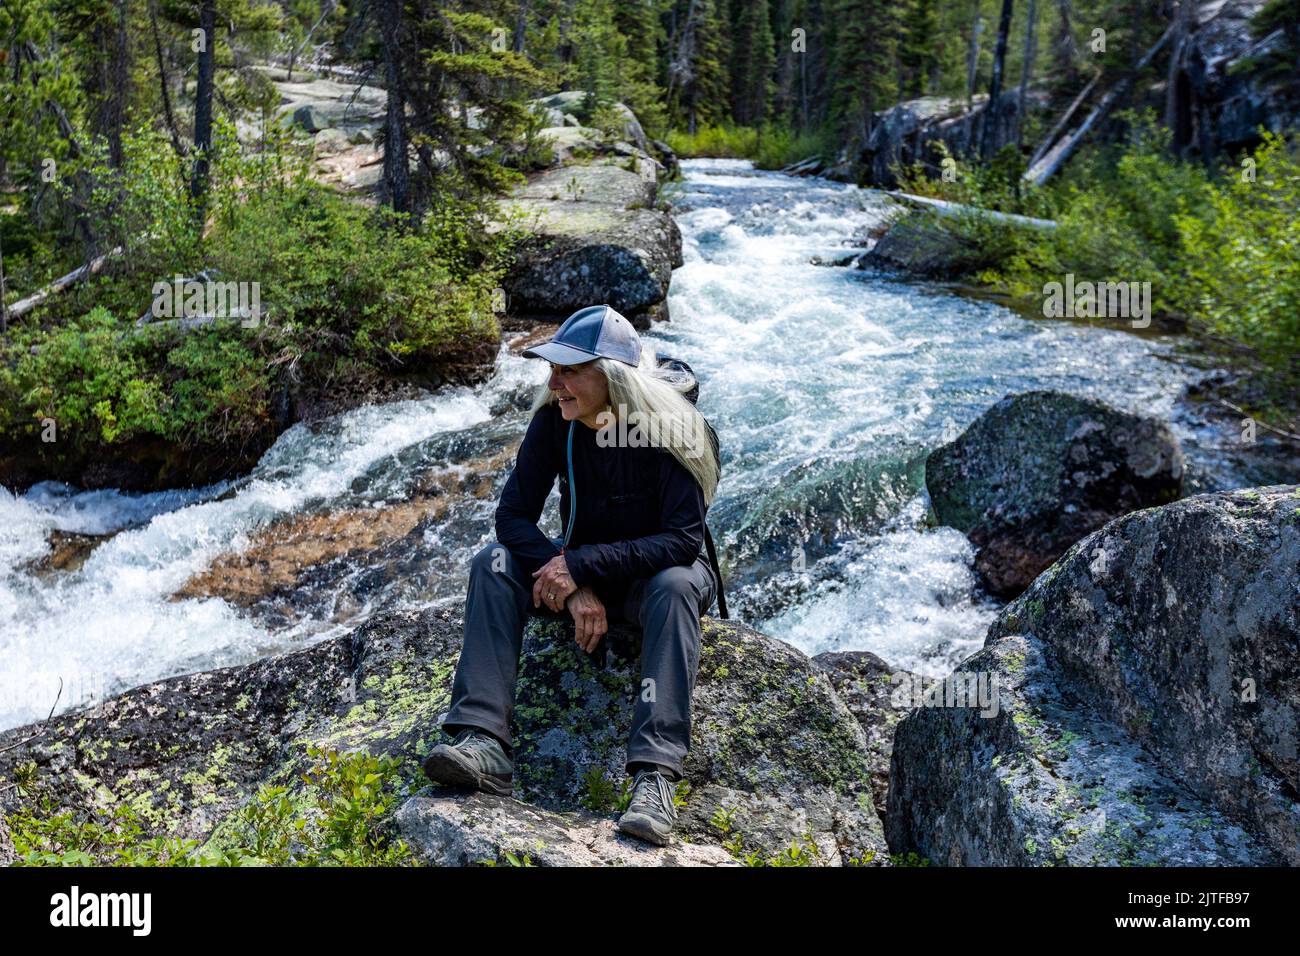 United States, Idaho, Stanley, Senior blonde woman hiking by rushing stream in mountains near Sun Valley Stock Photo